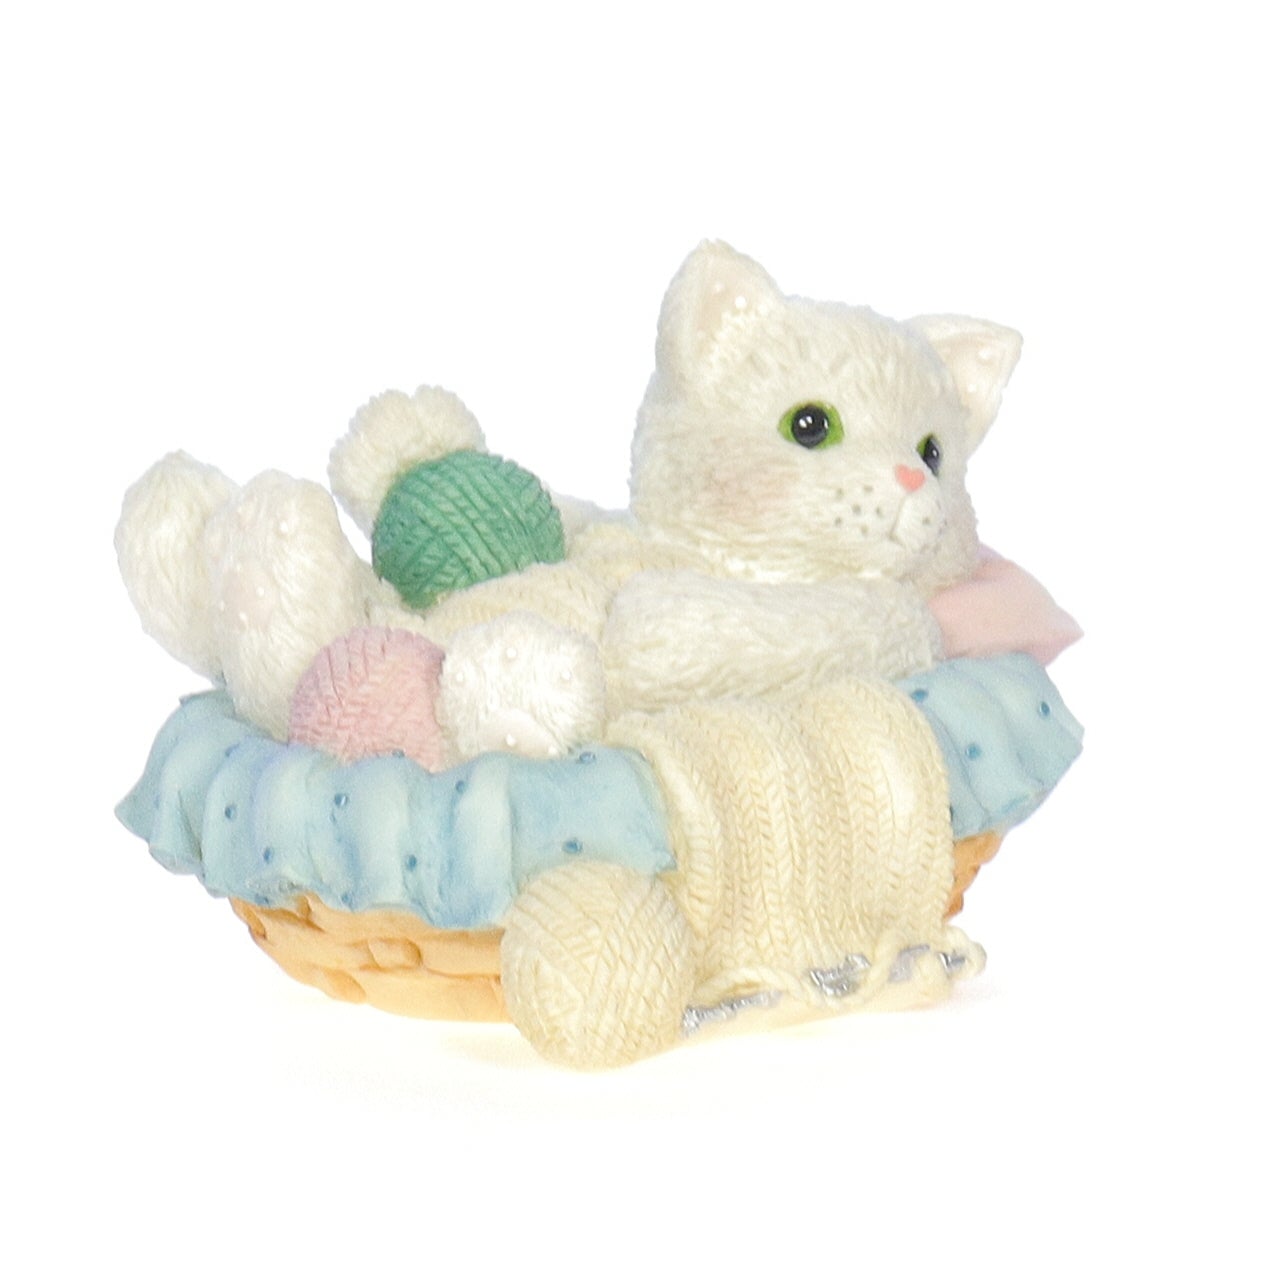 Calico_Kittens_Sweet_Dreams_Family_Figurine_1994